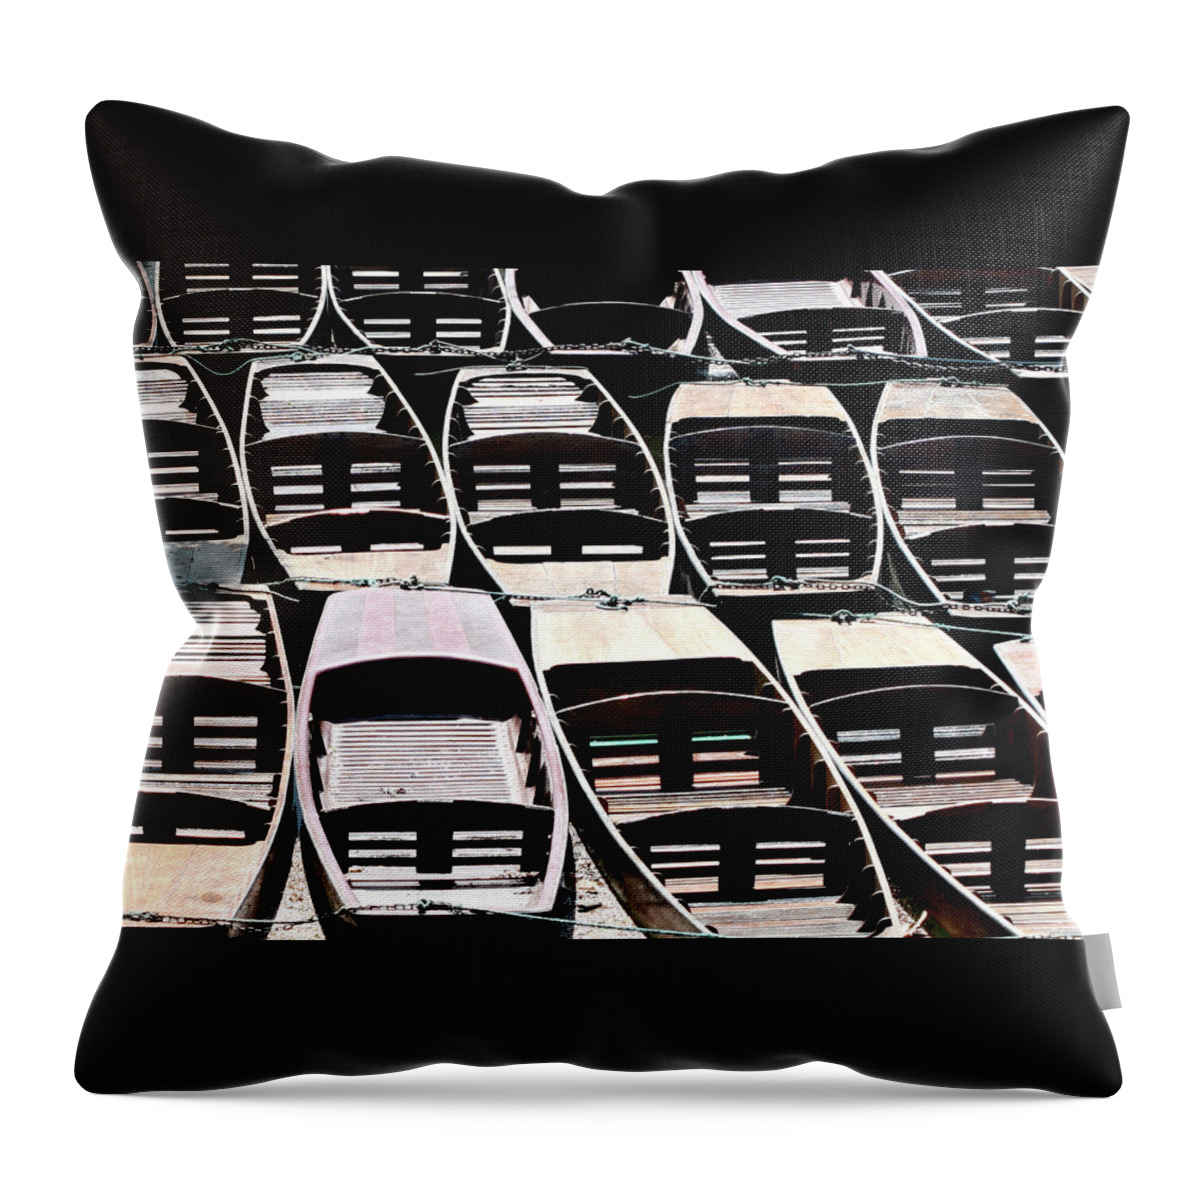 In A Row Throw Pillow featuring the photograph Punts At Oxford by Linda Scannell